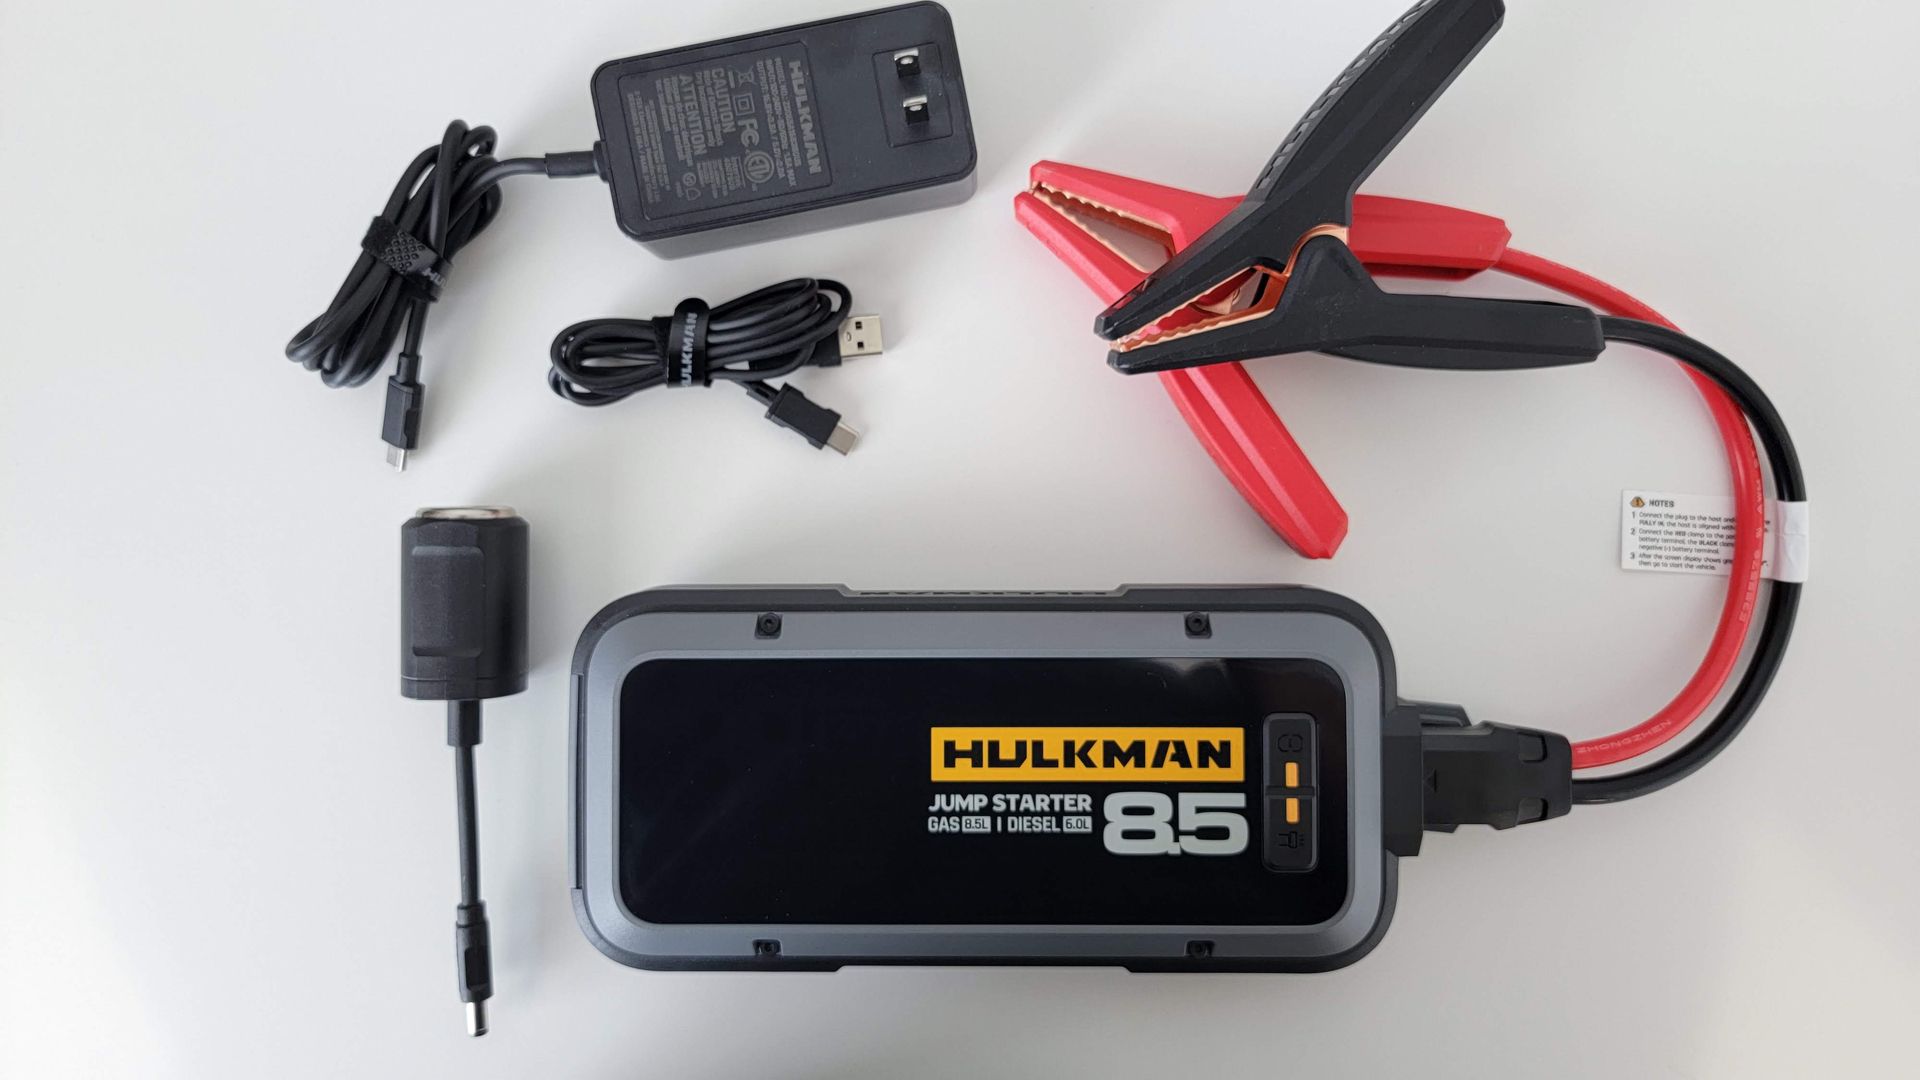 Hulkman Alpha 85 Portable Jump Starter Review: Just Buy One